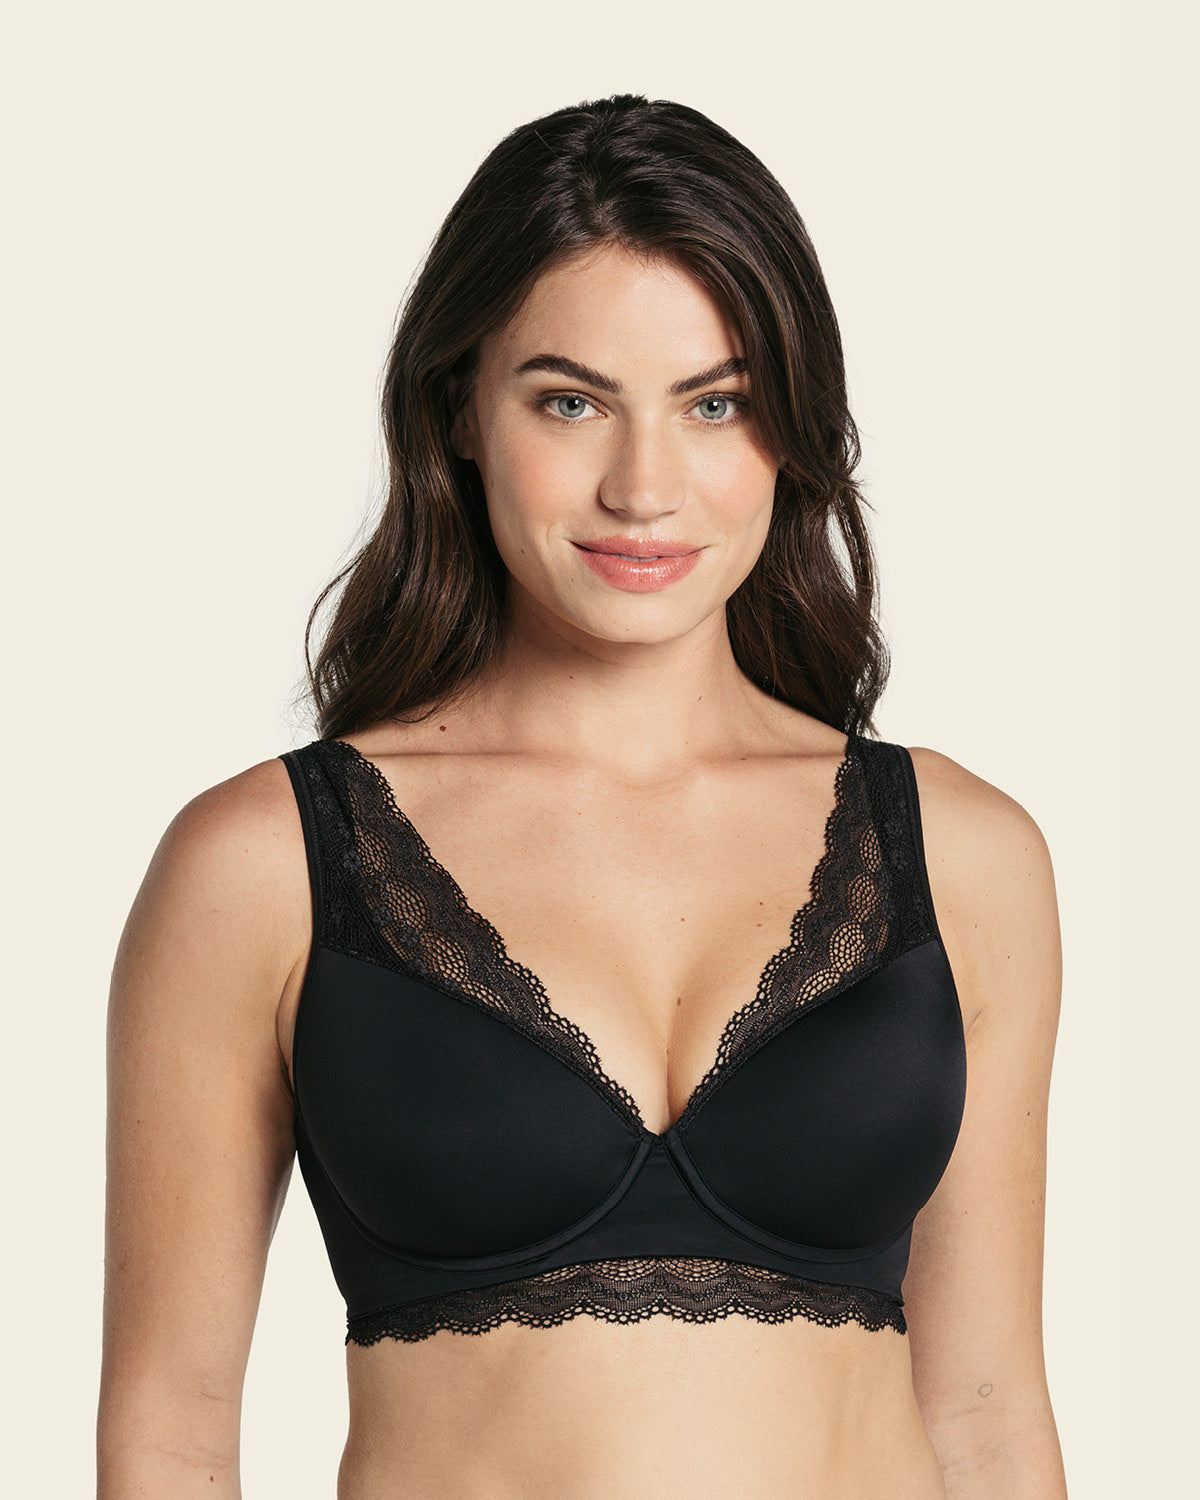 Wholesale 34 Bra Size Boobs Cotton, Lace, Seamless, Shaping